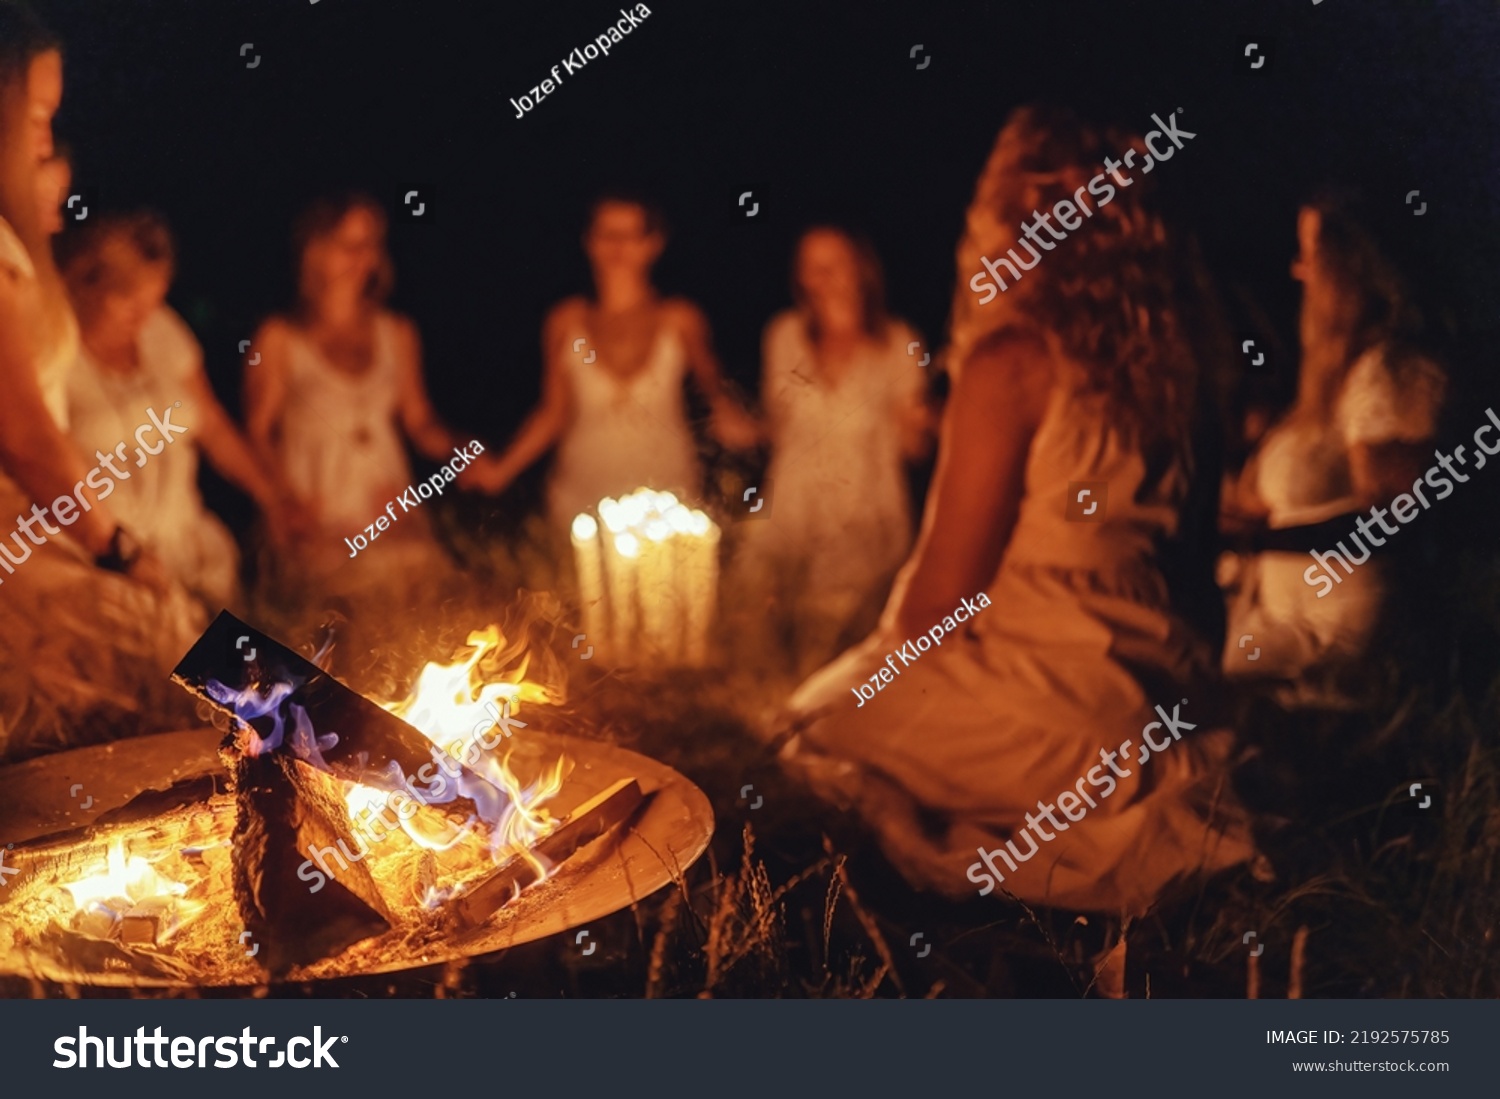 Women at the night ceremony. Ceremony space. #2192575785